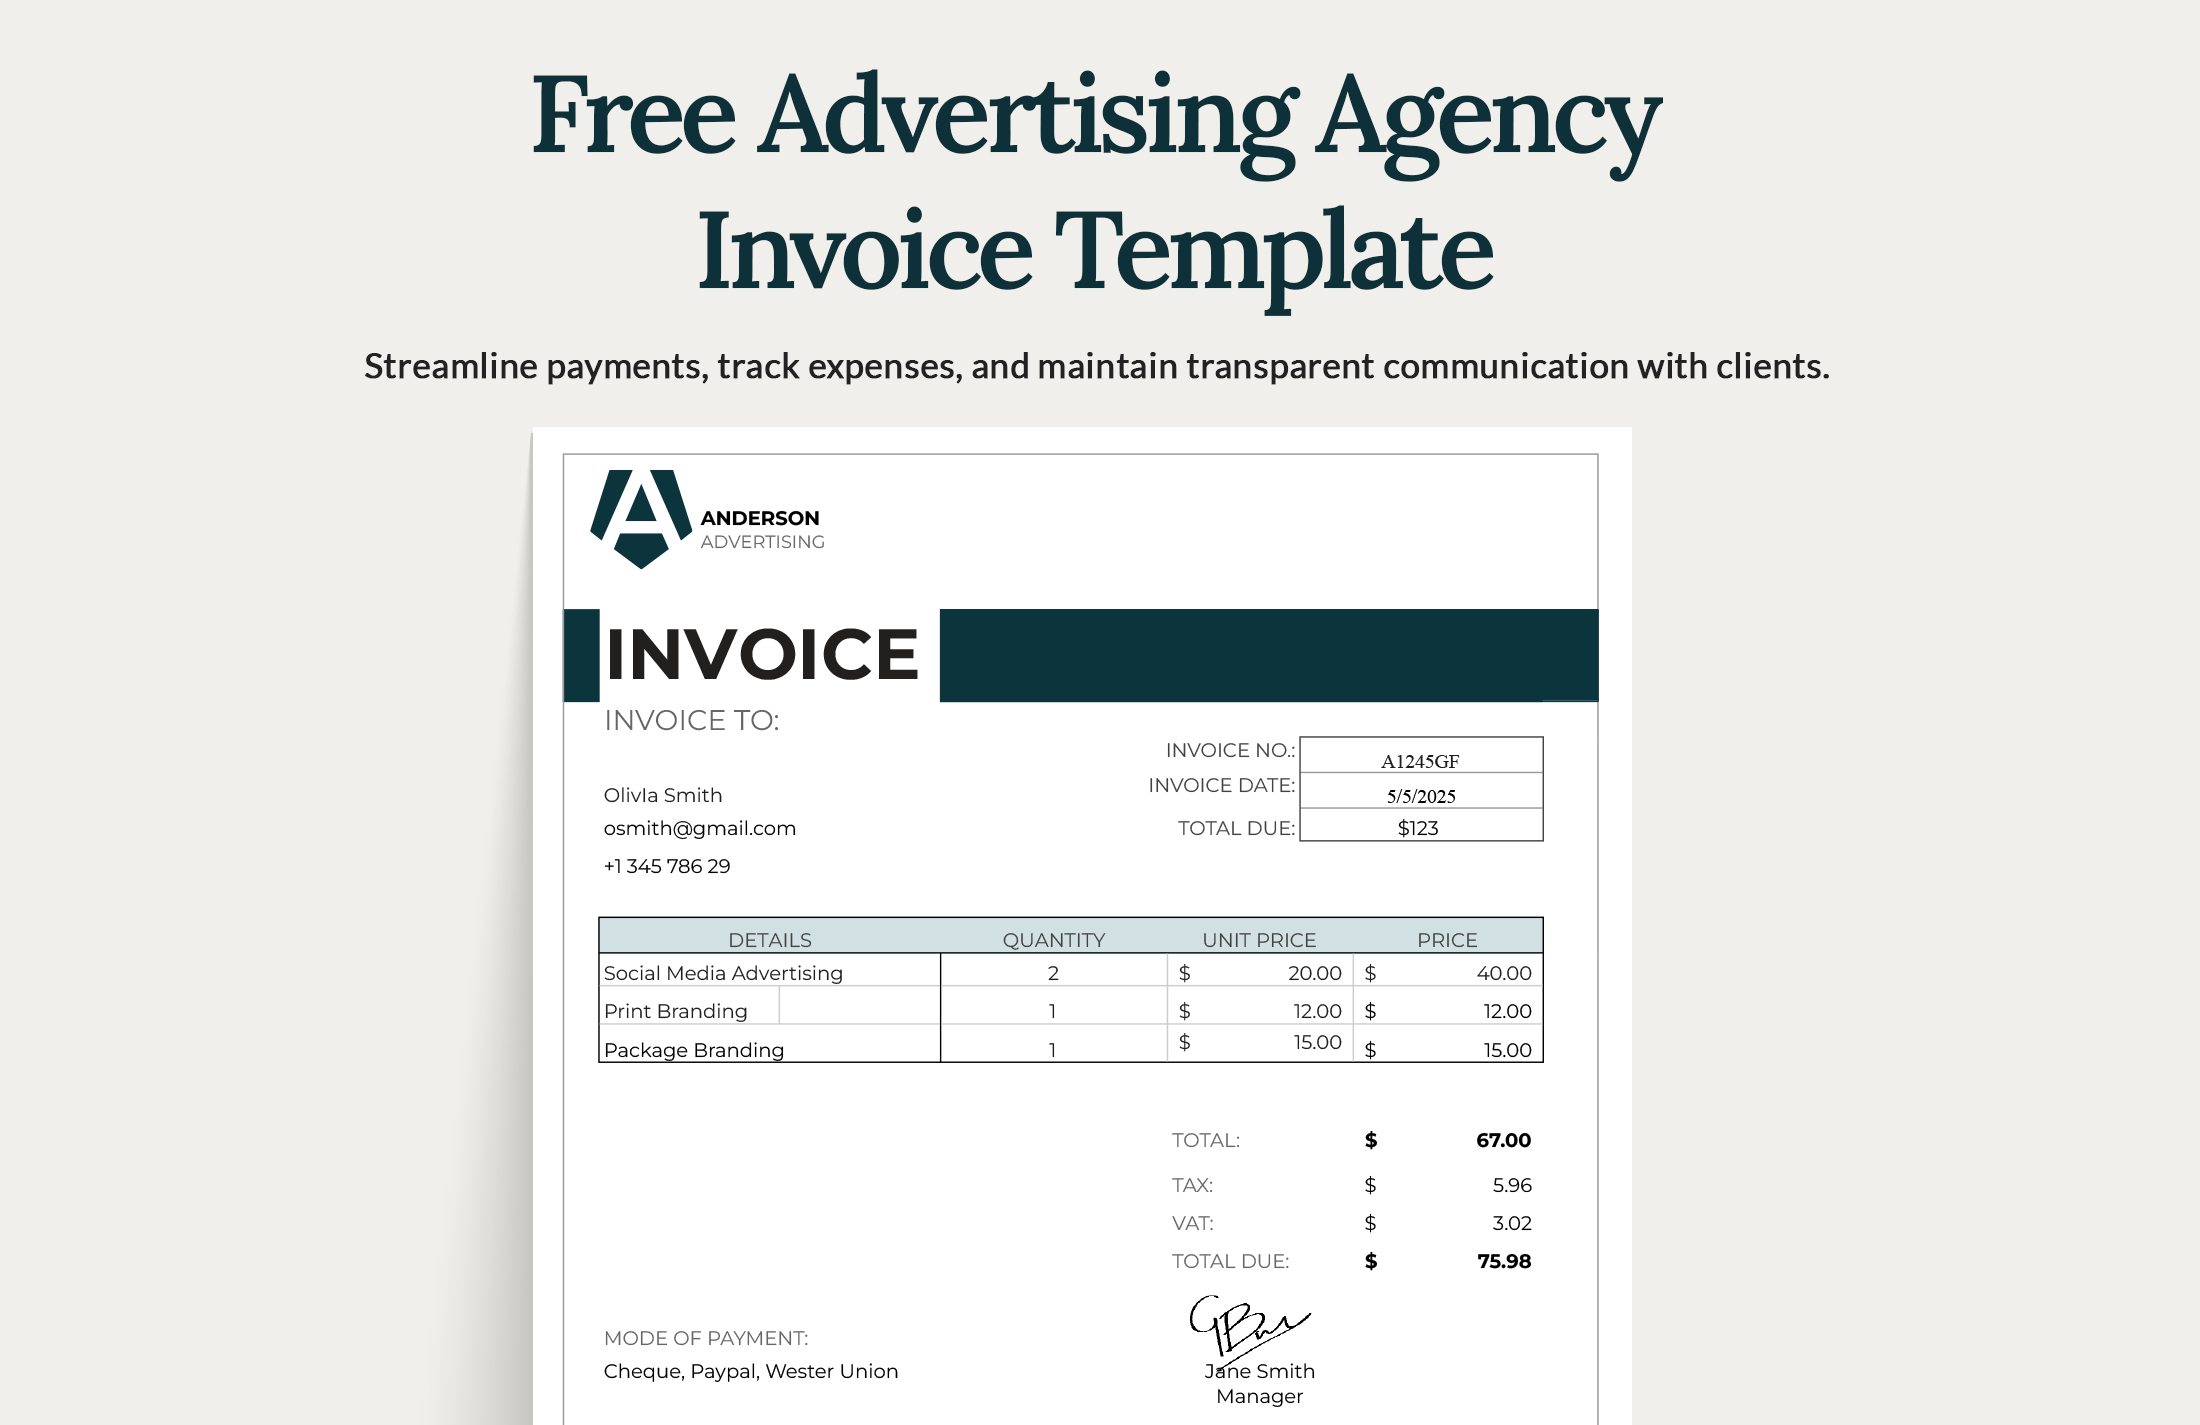 Free Advertising agency Invoice Template Google Docs, Google Sheets